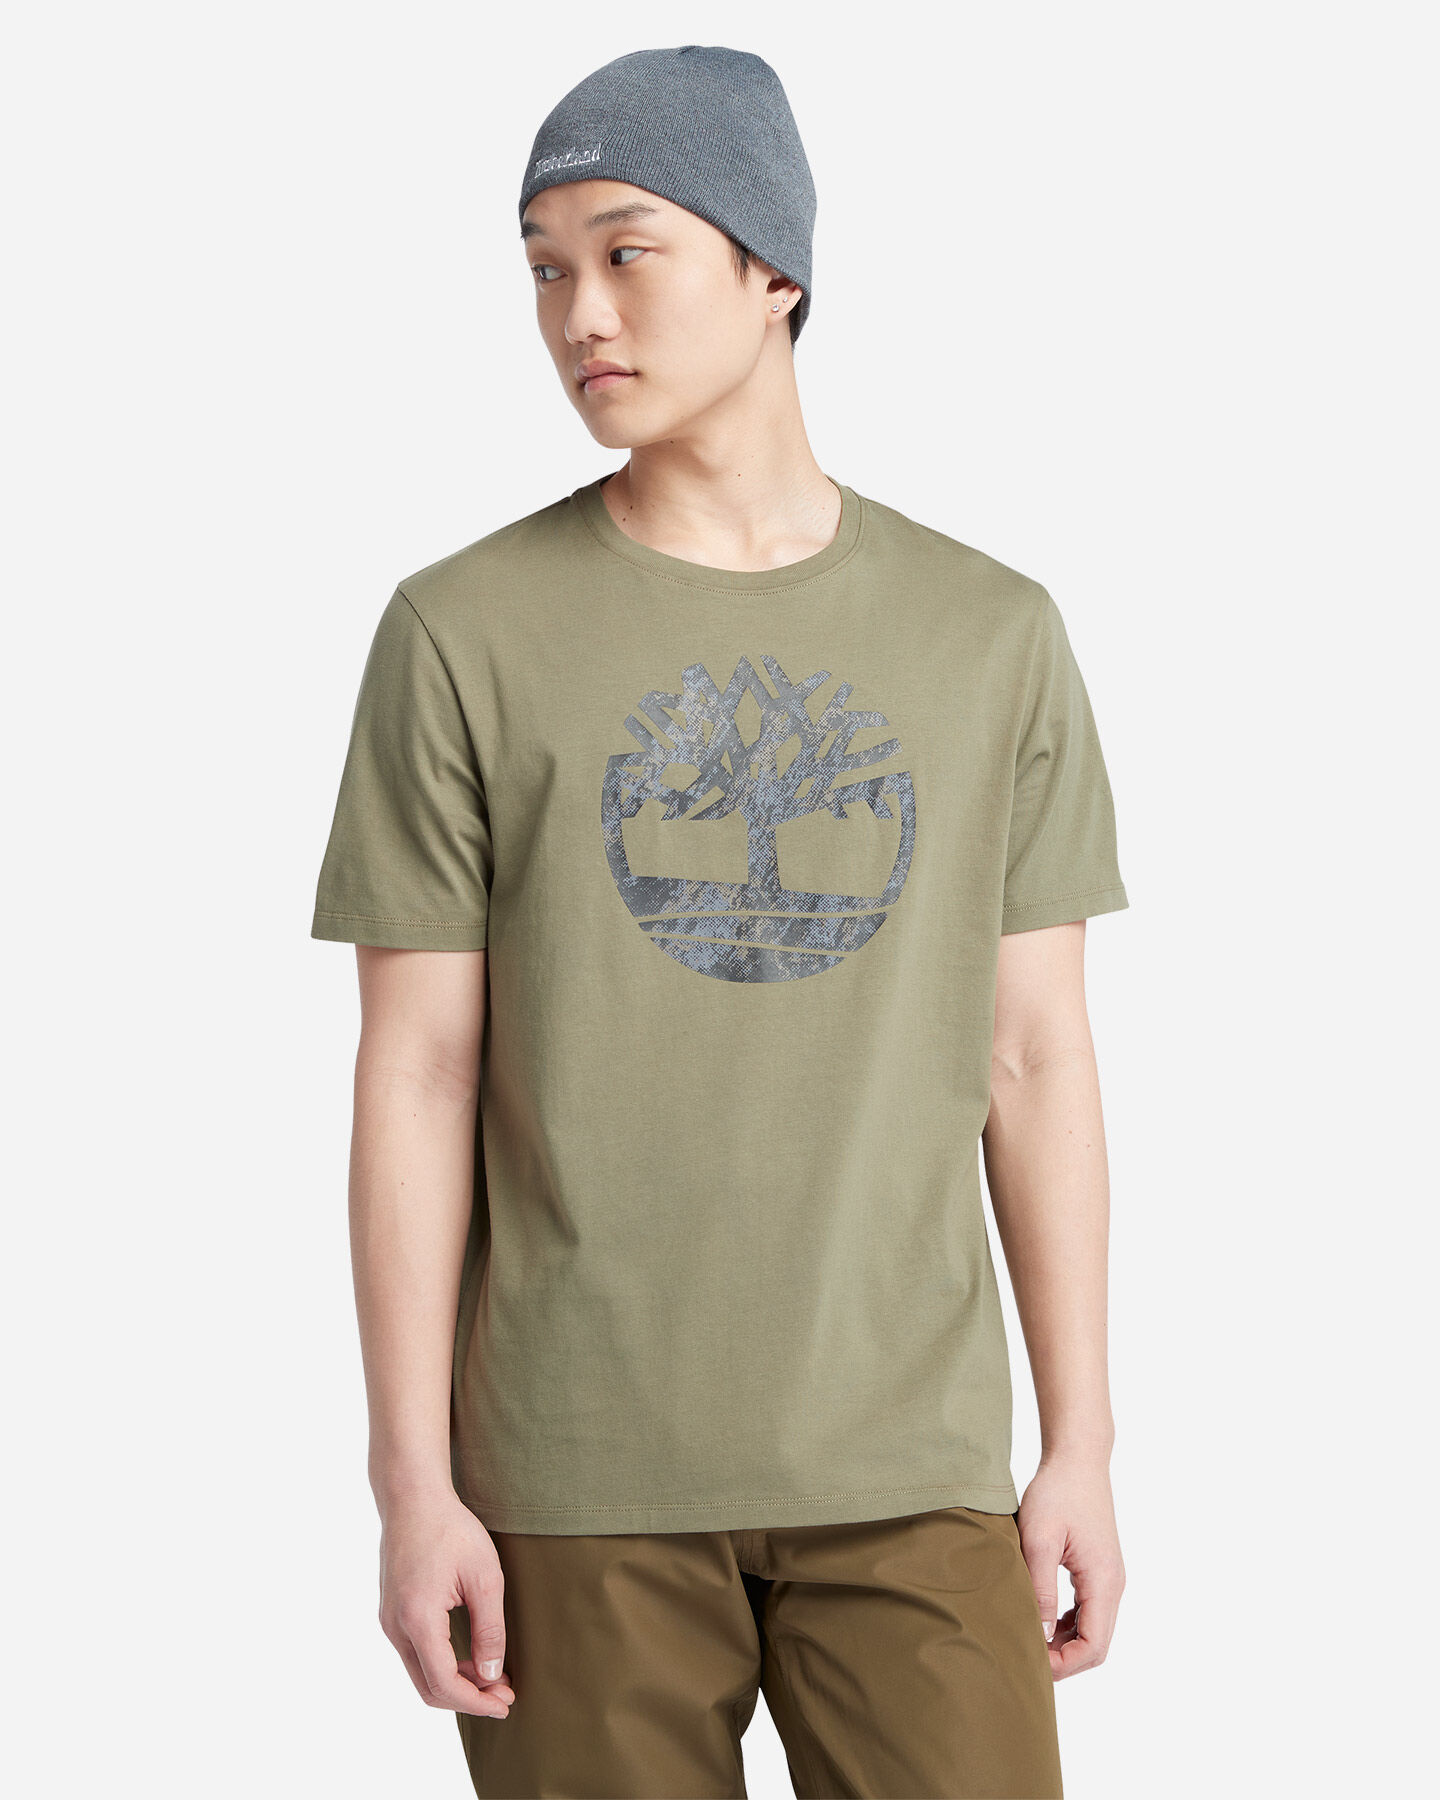  T-Shirt TIMBERLAND CAMO TREE M S4127278|5901|S scatto 3